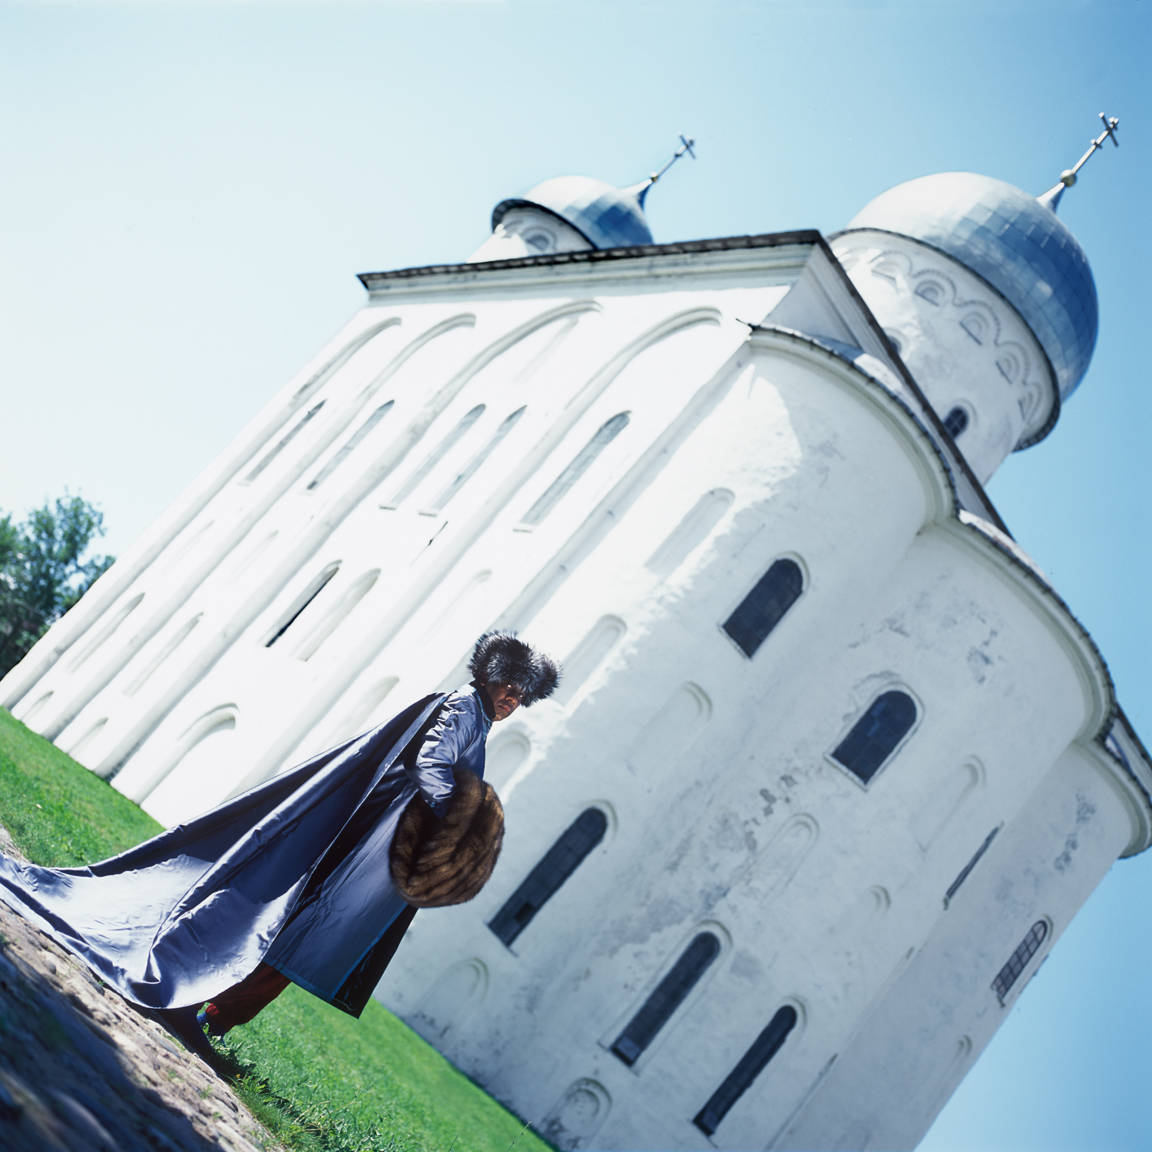 Andre Leon Talley, Vogue magazine's editor at large on his visit to Russia. This picture was taken in front of Georgiev Cathedral, Uriev Monastery, Novgorod Region. Andre Leon Talley's outfit consists of a fur hat by Prada, muff by Fendi and a gown by Chanel Haute Couture.